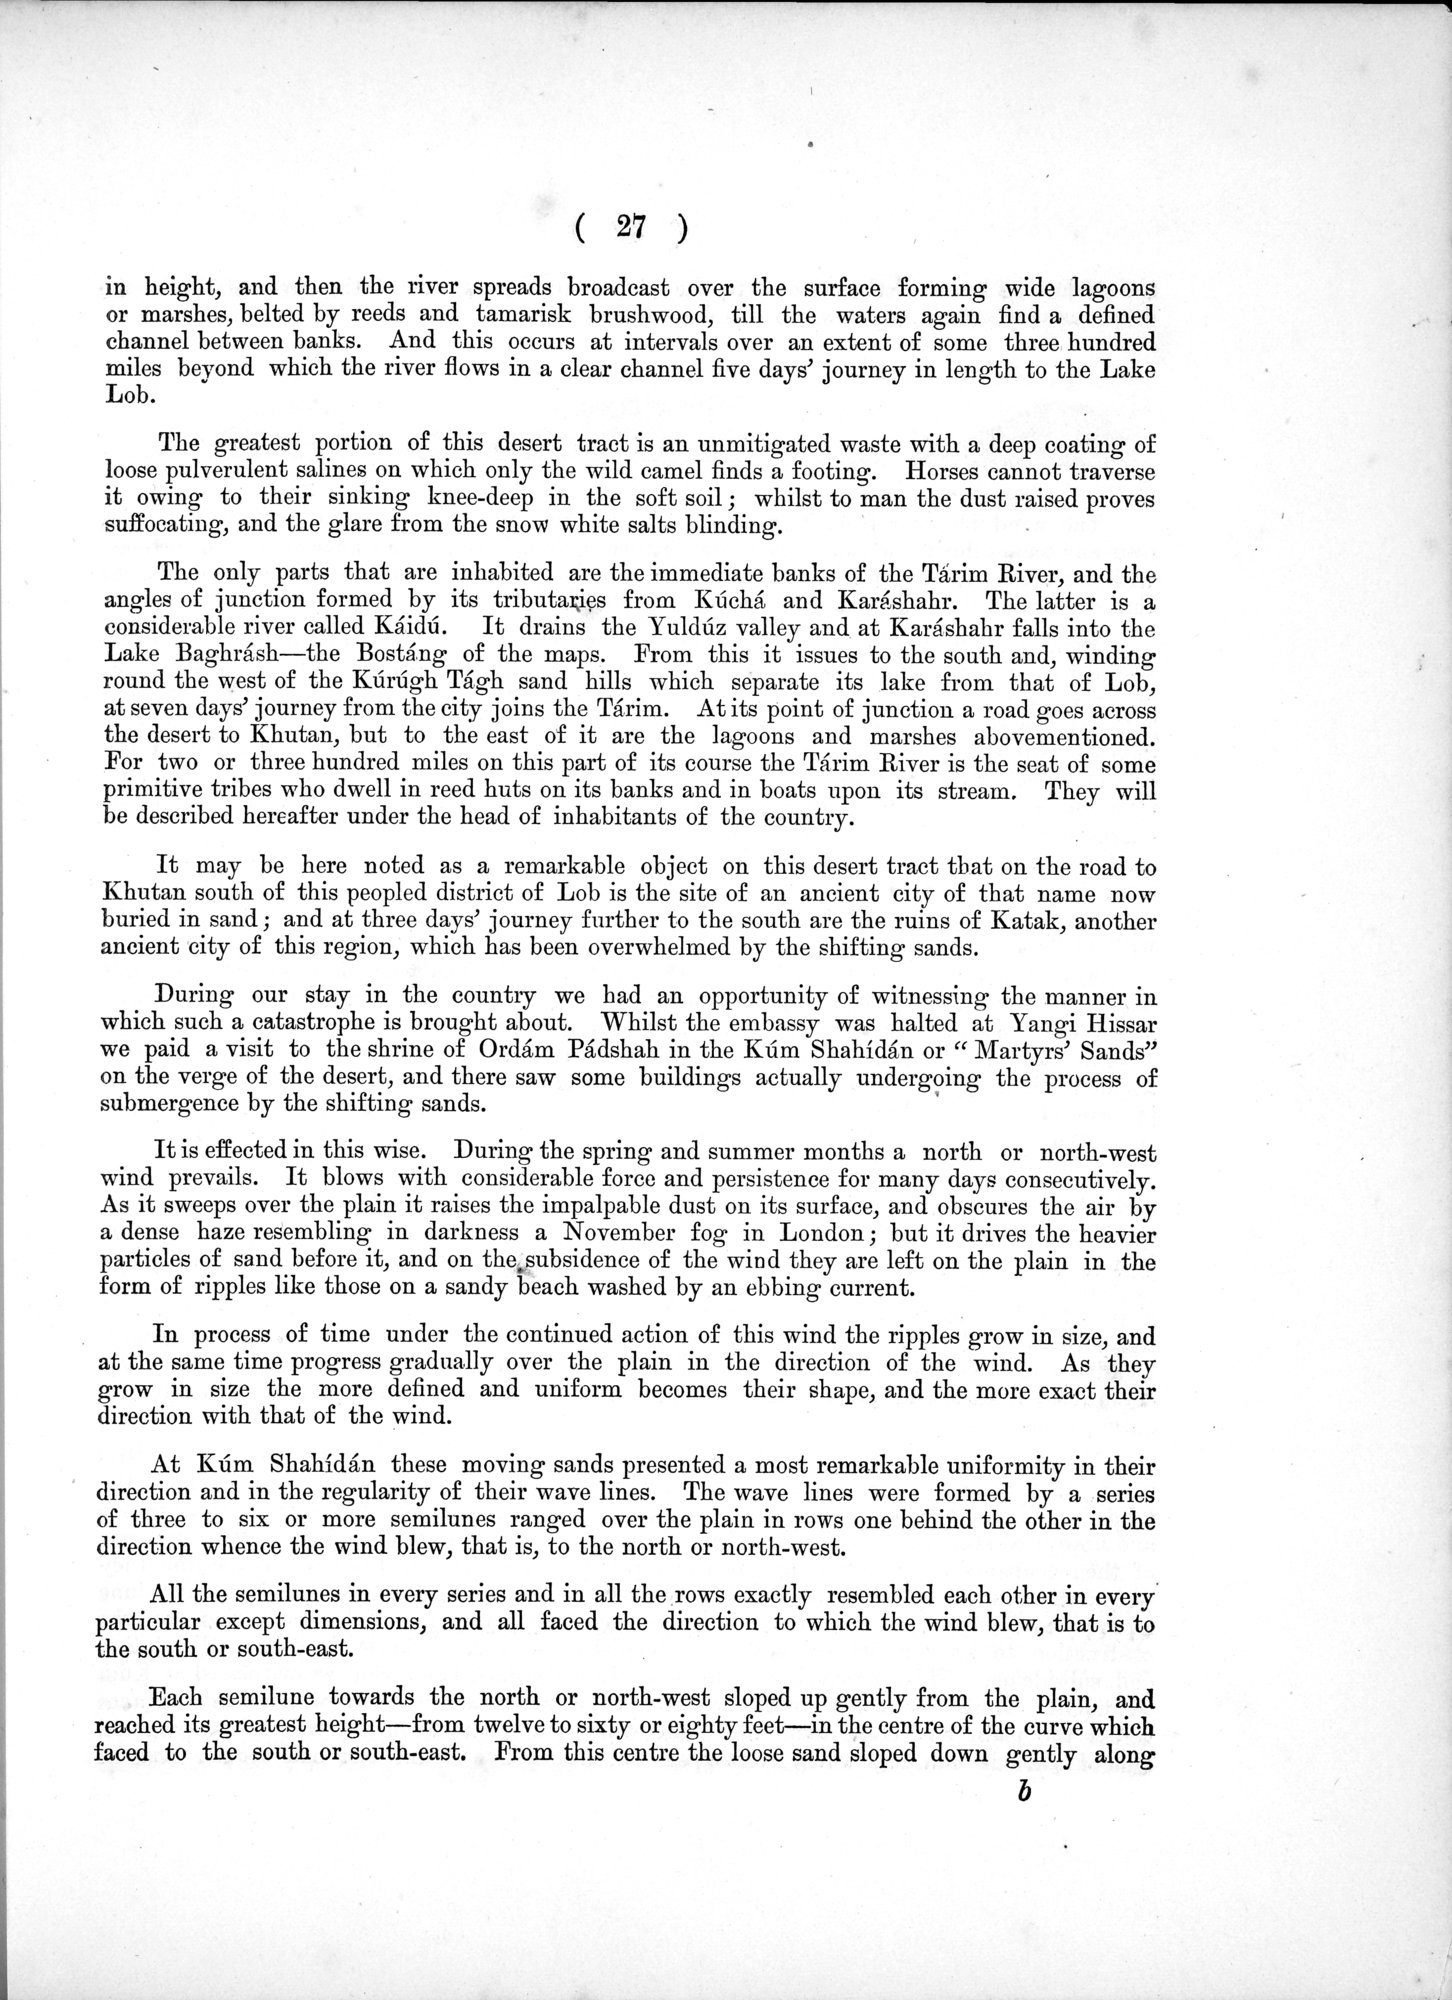 Report of a Mission to Yarkund in 1873 : vol.1 / Page 59 (Grayscale High Resolution Image)